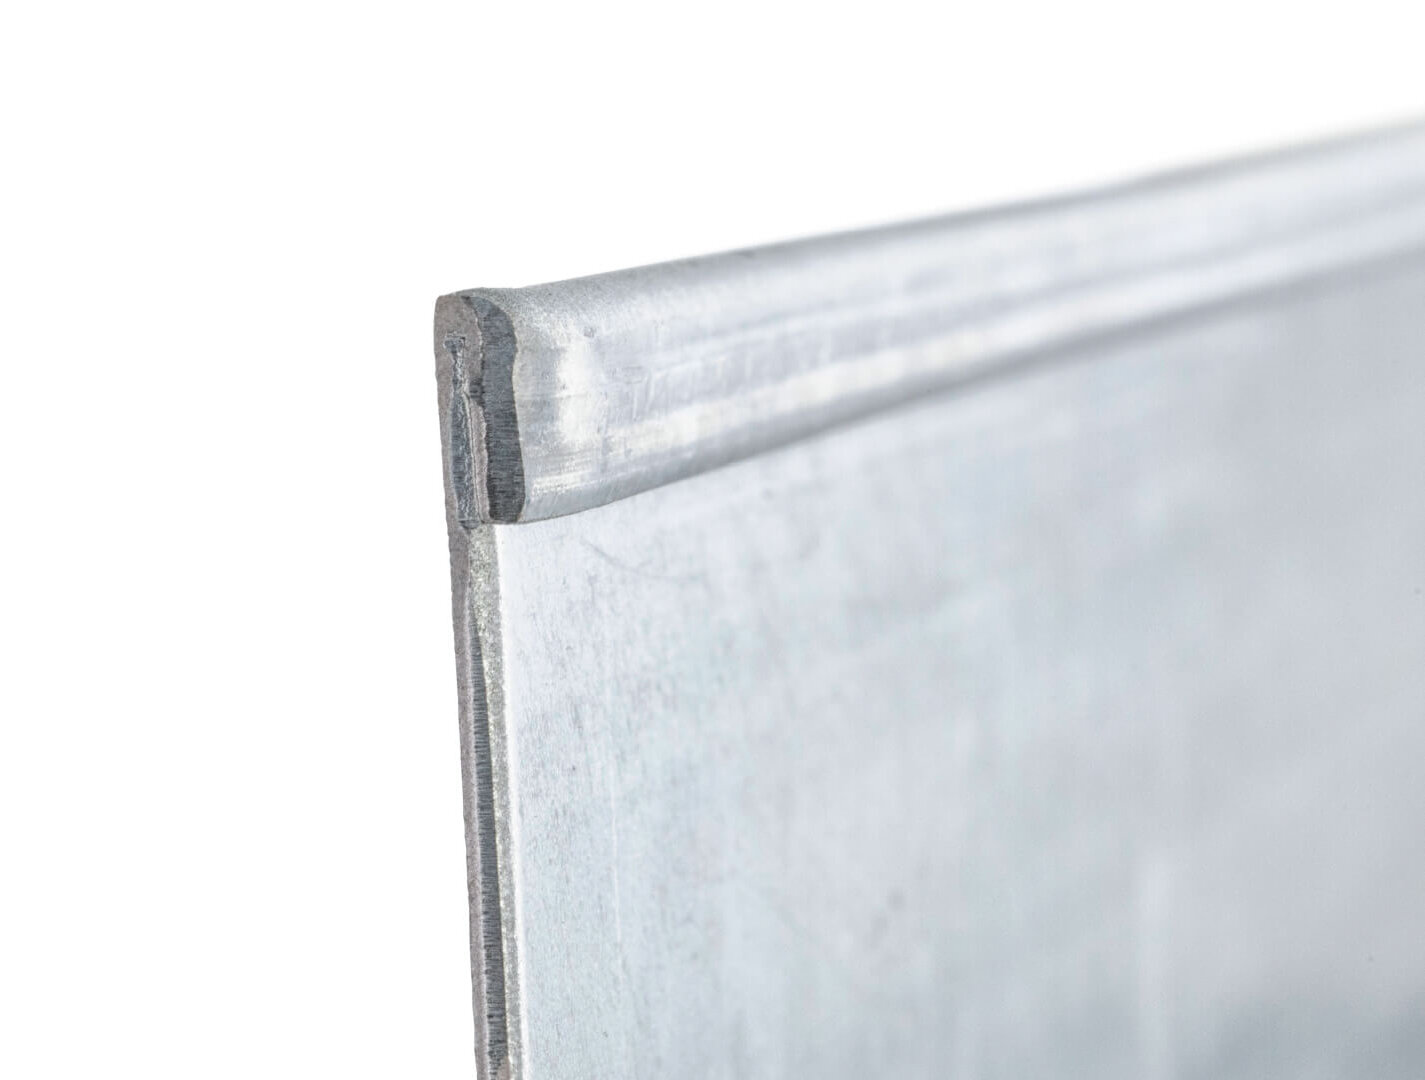 our outward-facing rolled top closes securely in on itself, making the edging easier to form than competitors'